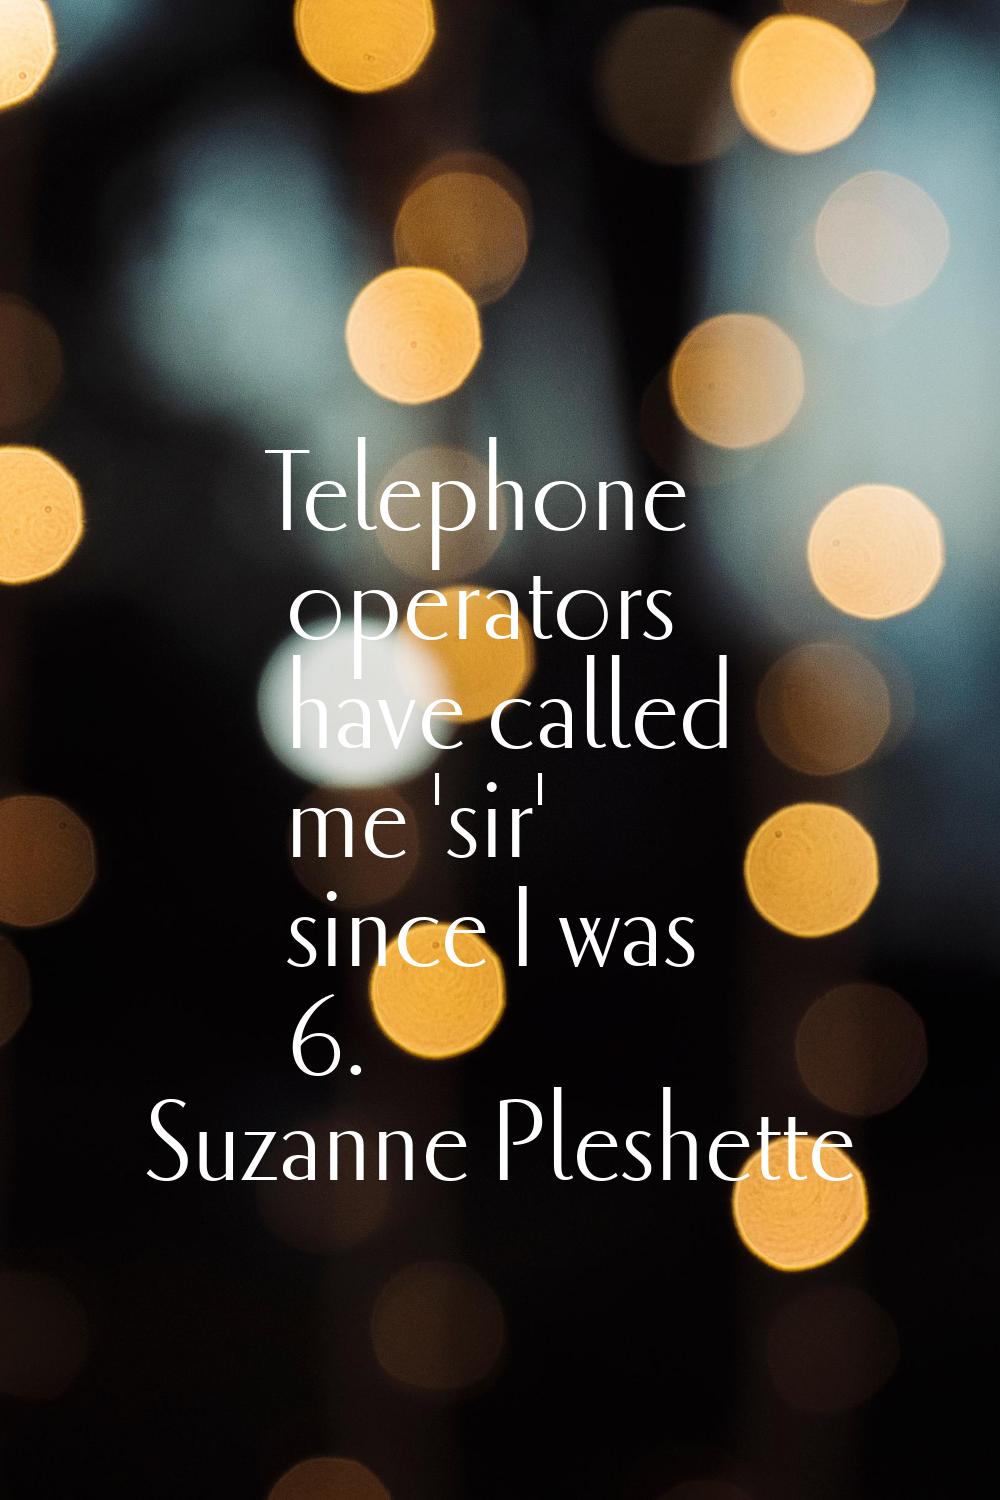 Telephone operators have called me 'sir' since I was 6.